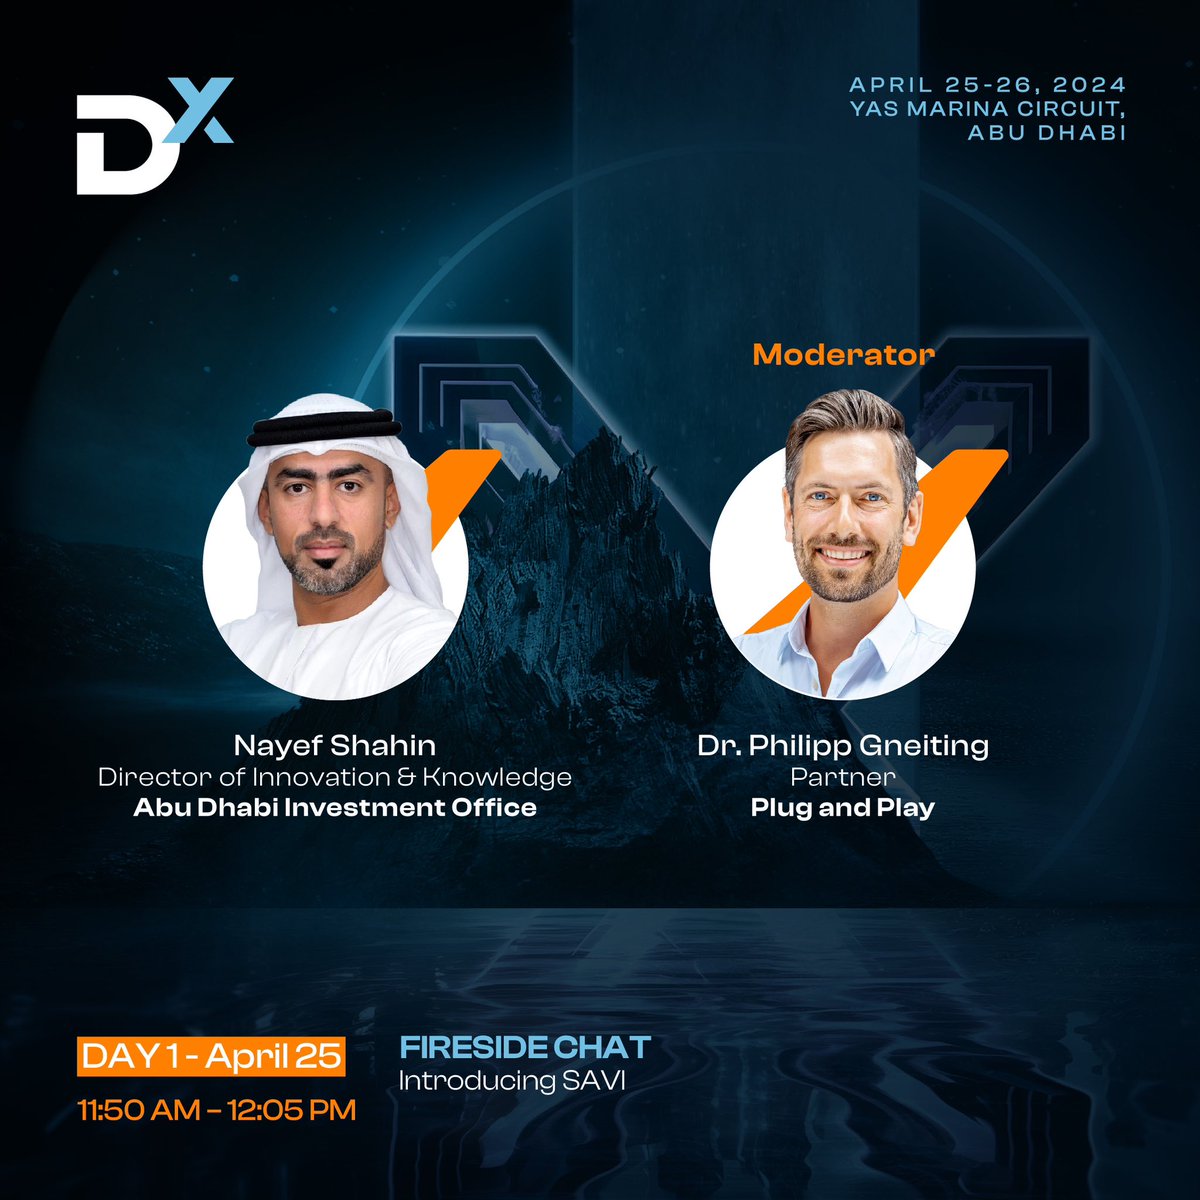 Get ready for an exclusive Fireside Chat: Introducing SAVI. Delve into the future of Abu Dhabi's Smart Autonomous Vehicle Industry as we unveil groundbreaking insights and discuss the next frontier of innovation! @Bayanatg42 @InvestAbuDhabi @saviabudhabi @AbuDhabiDMT